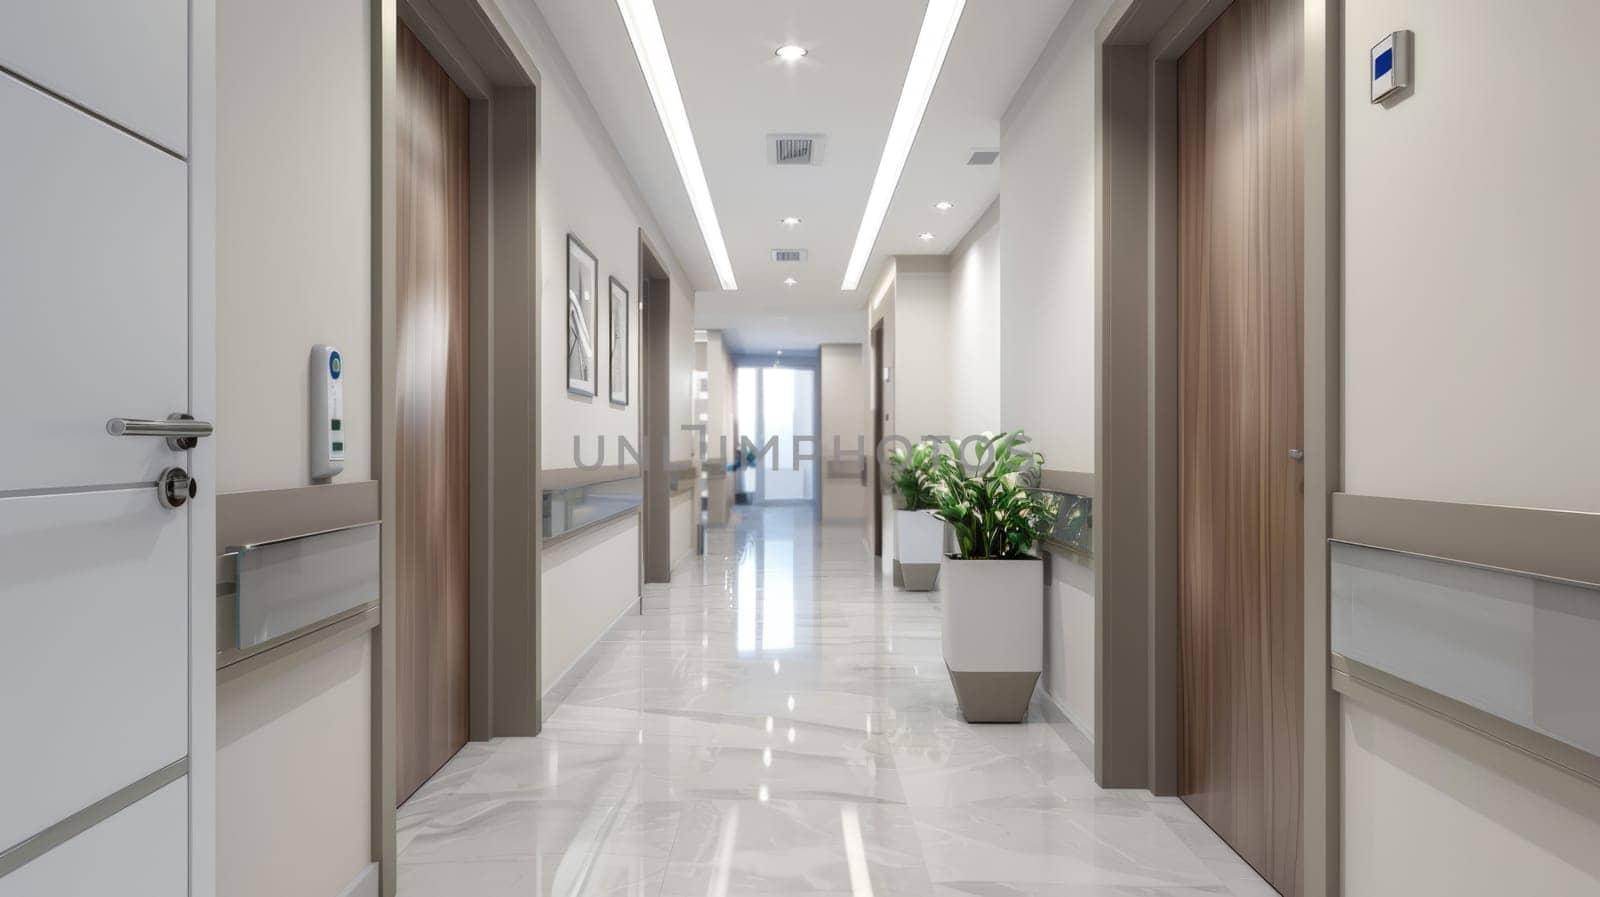 Hallway in a contemporary clinic with clean lines AI